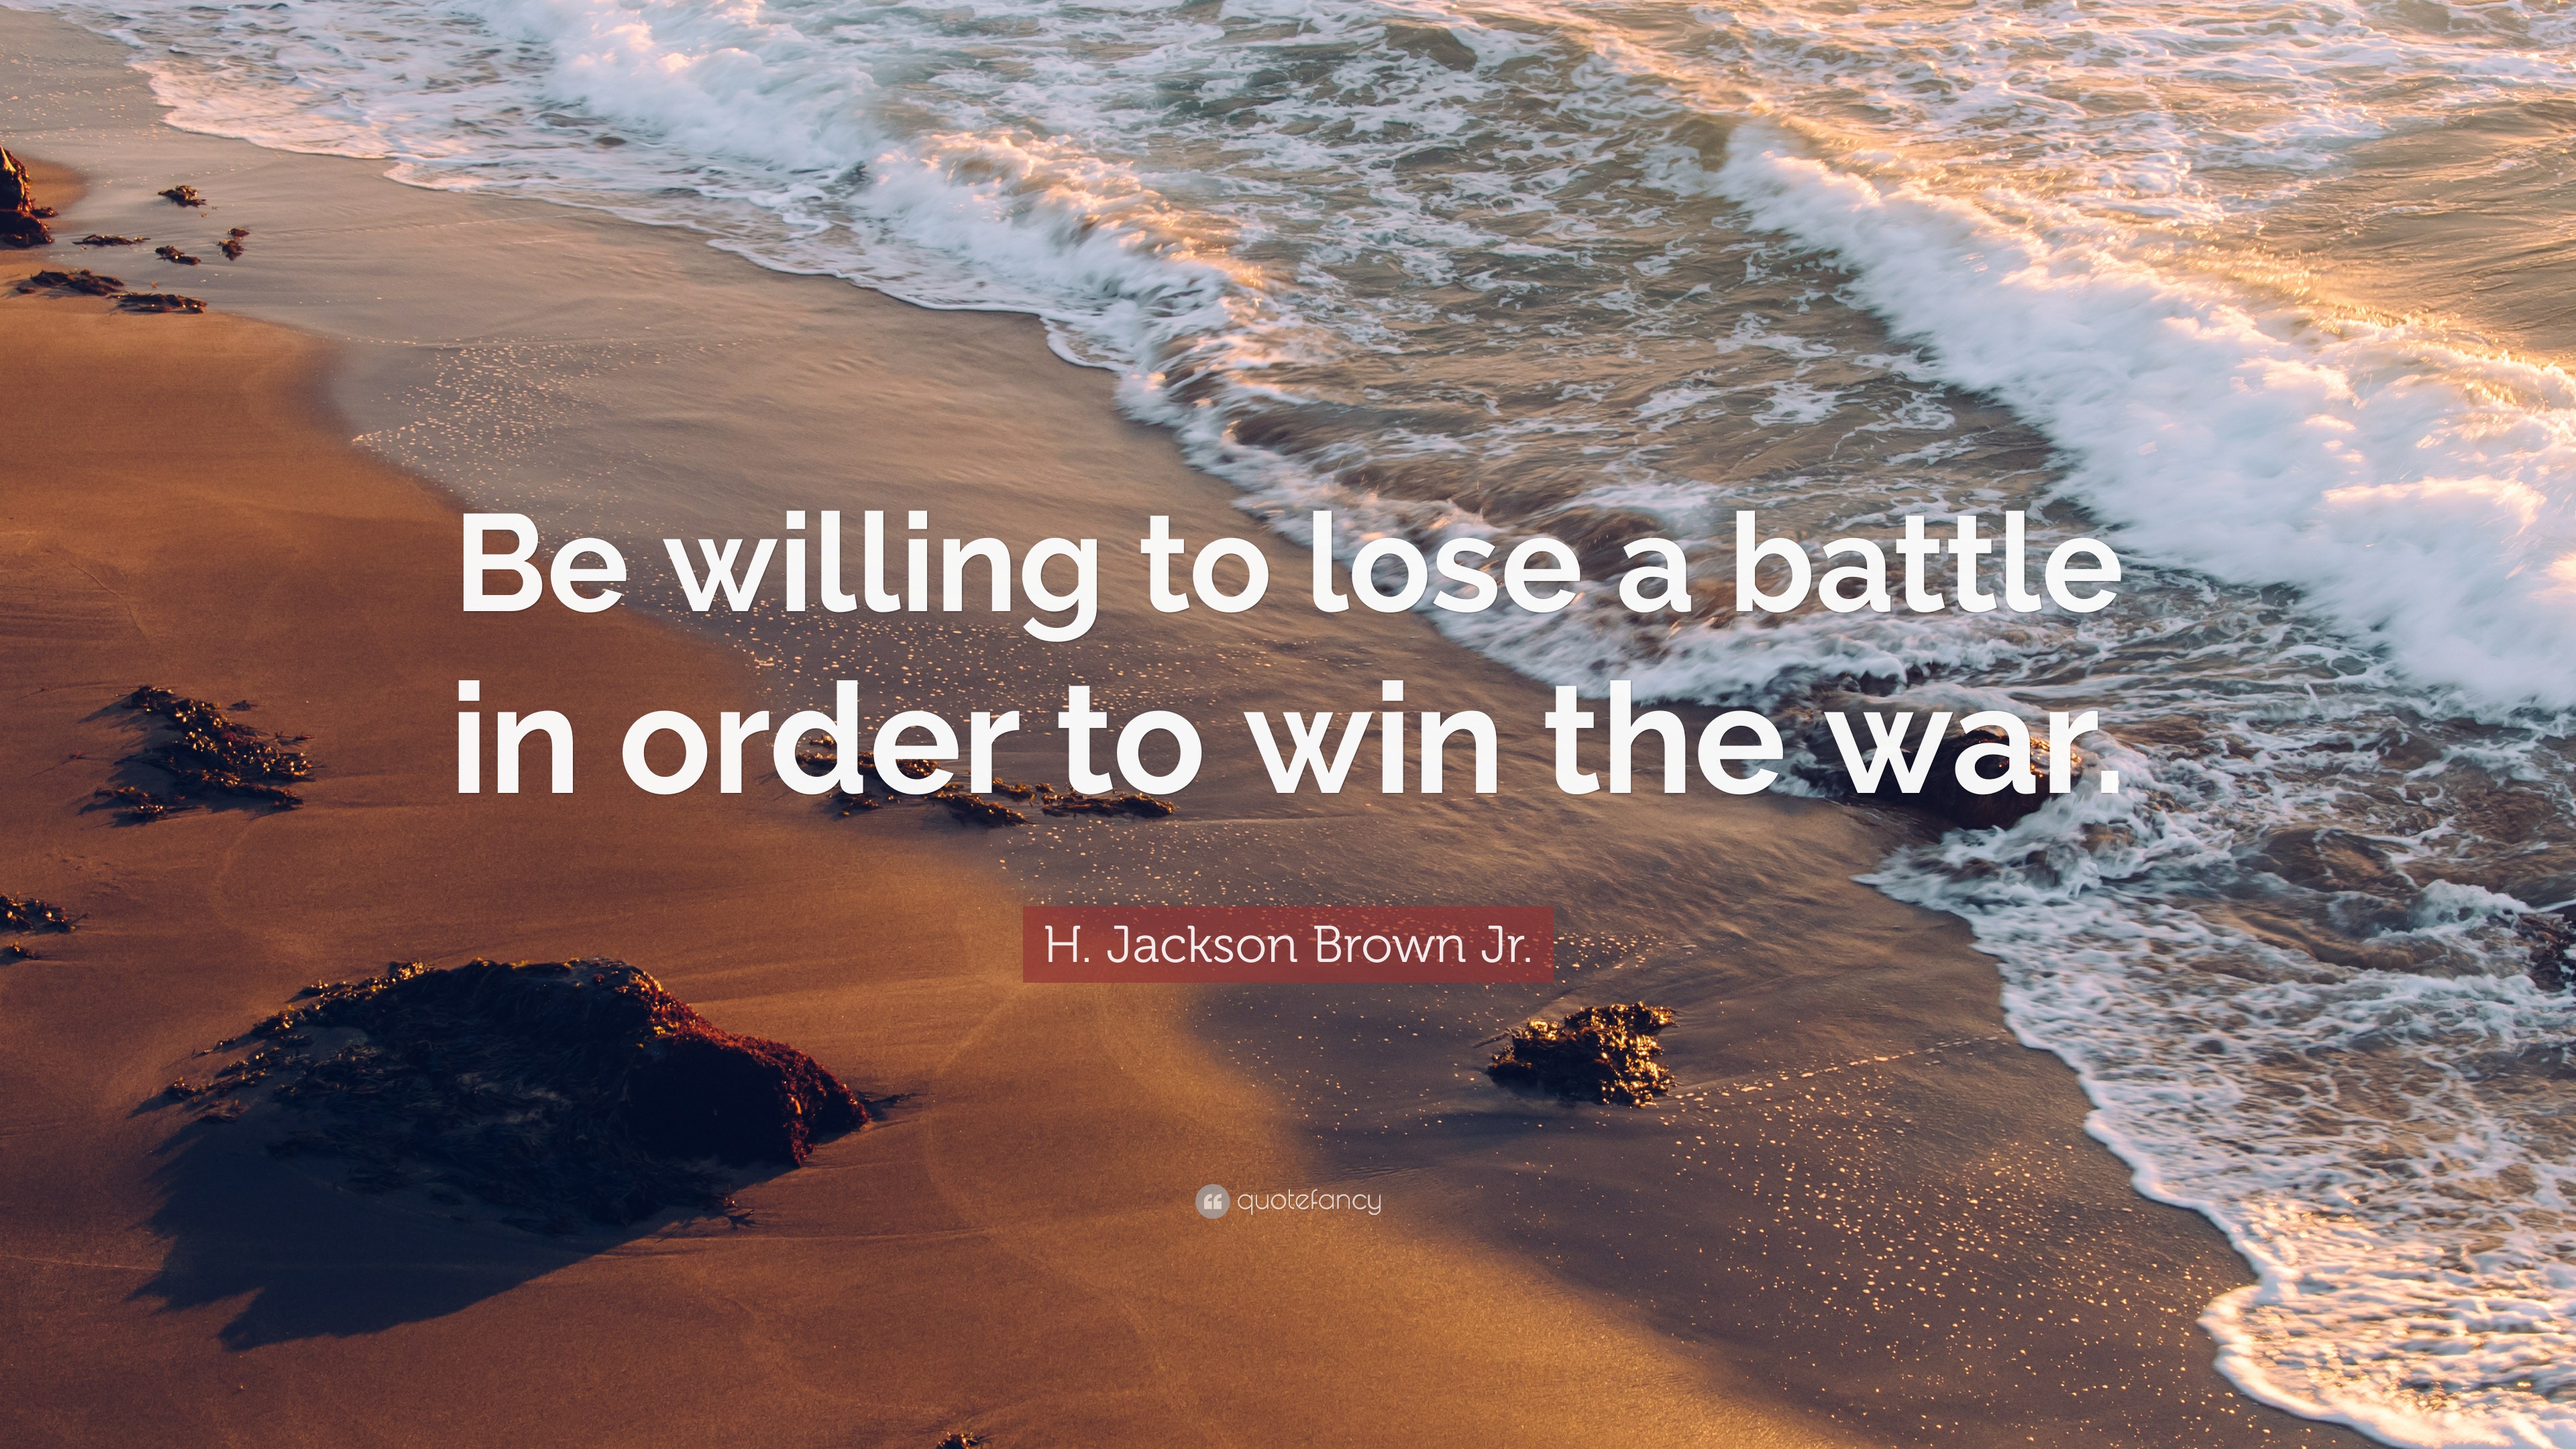 H. Jackson Brown Jr. Quote “Be willing to lose a battle